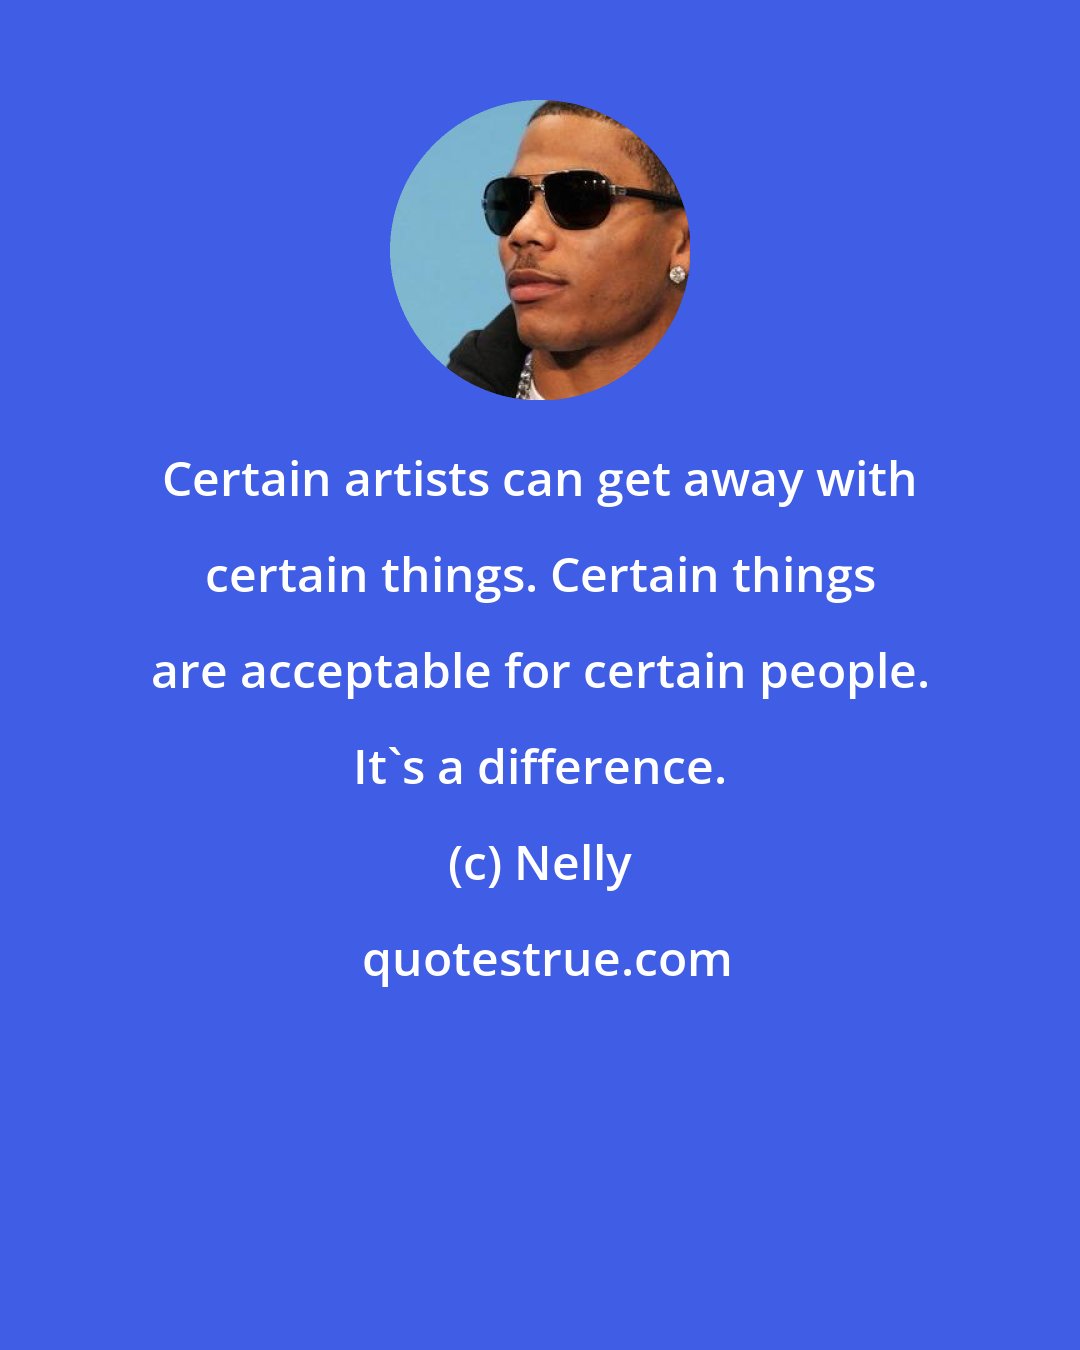 Nelly: Certain artists can get away with certain things. Certain things are acceptable for certain people. It's a difference.